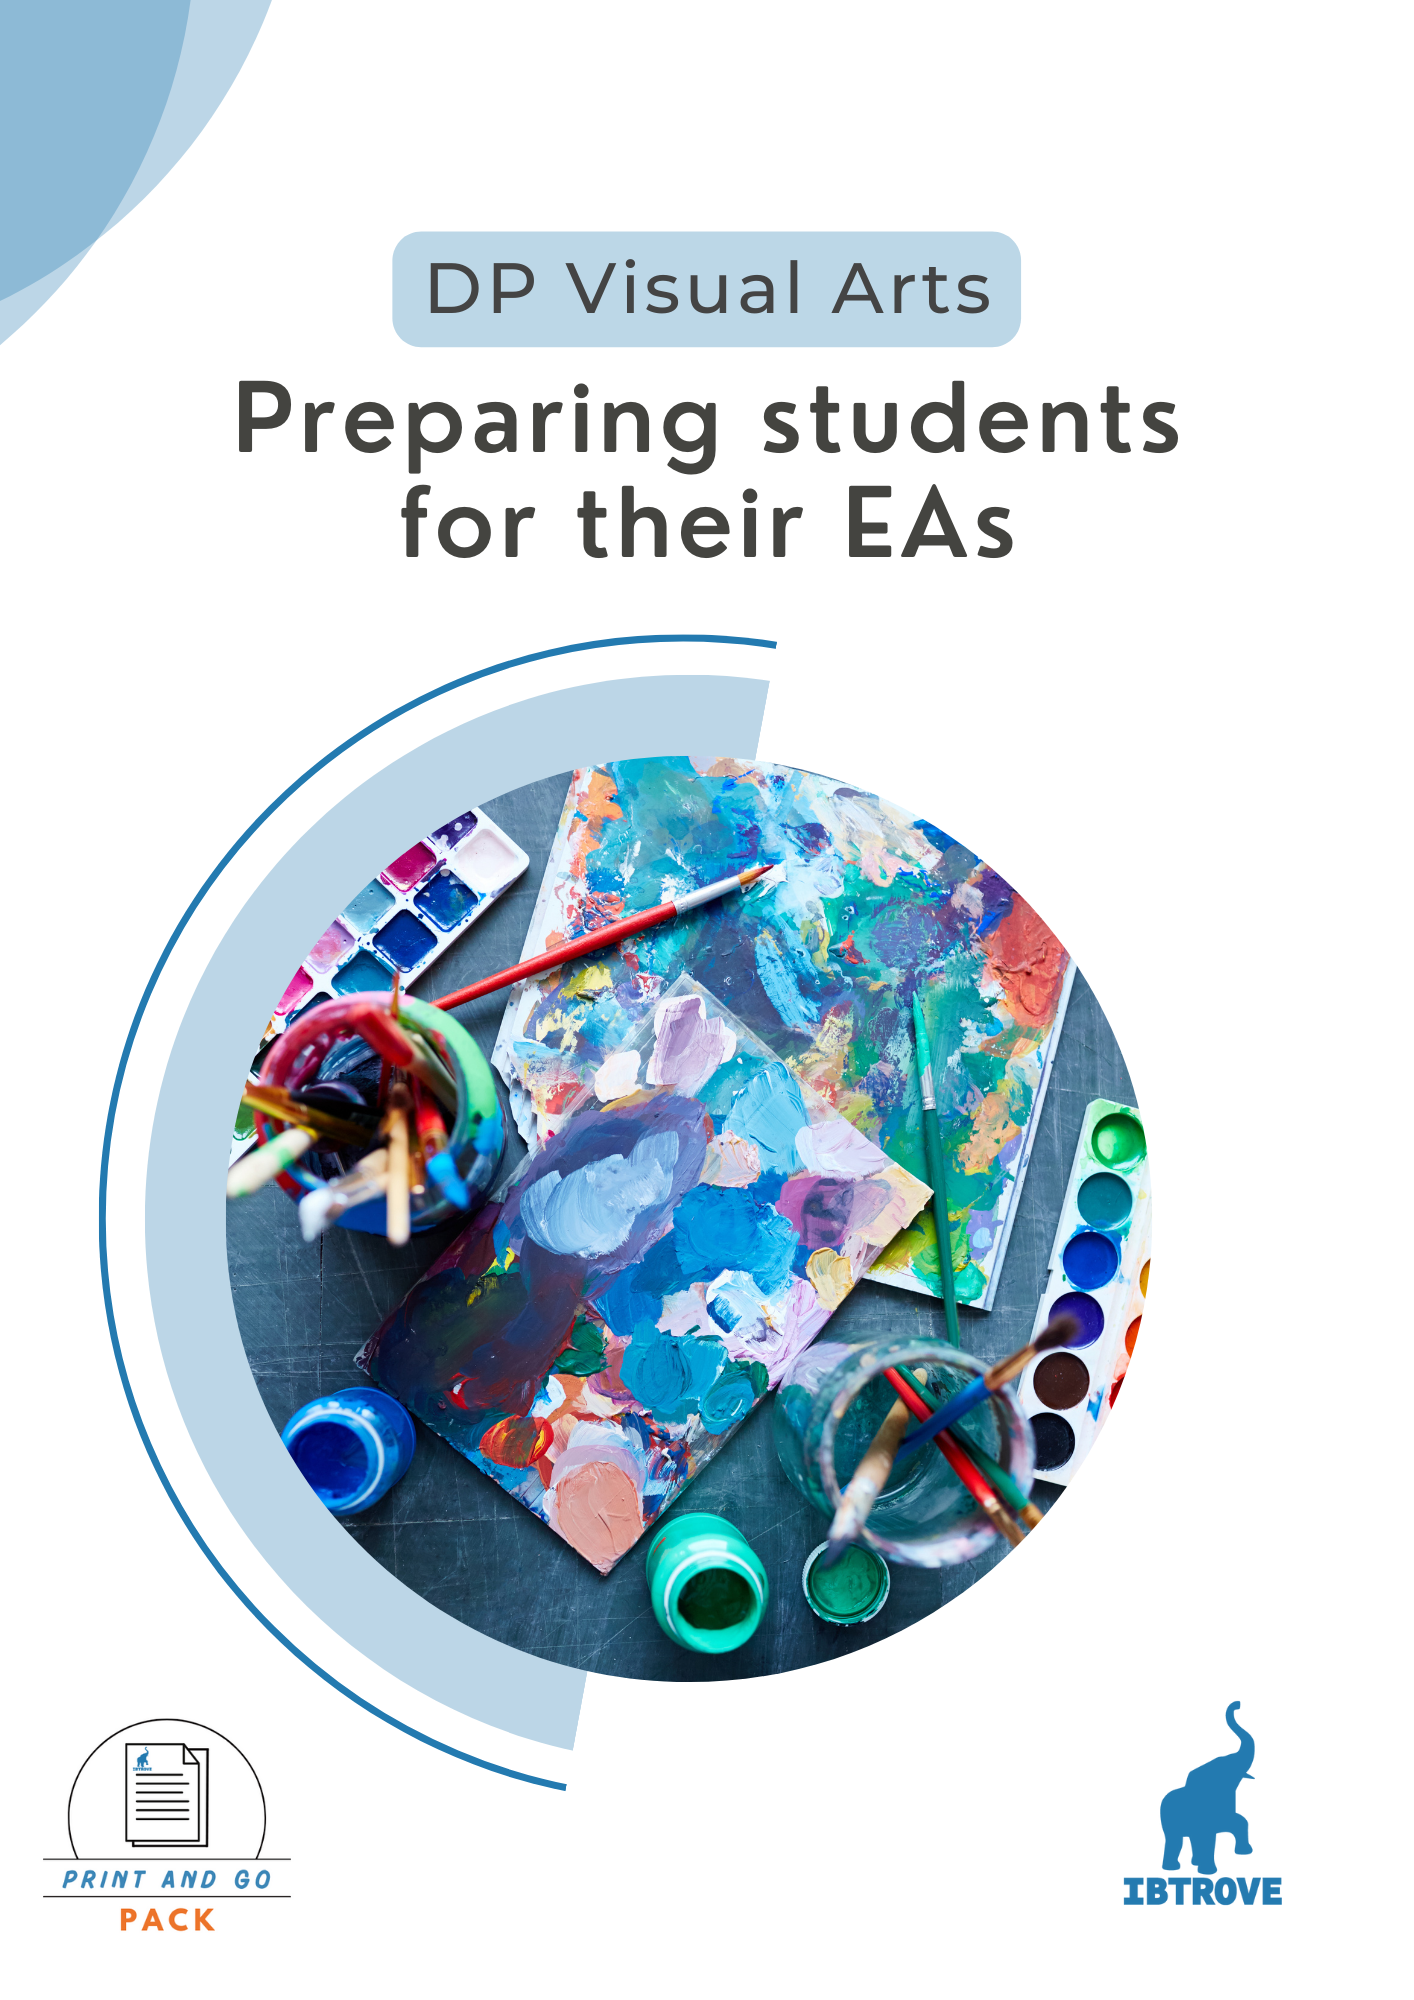 Preparing students for their EAs in DP Visual Arts (Print and Go Pack)